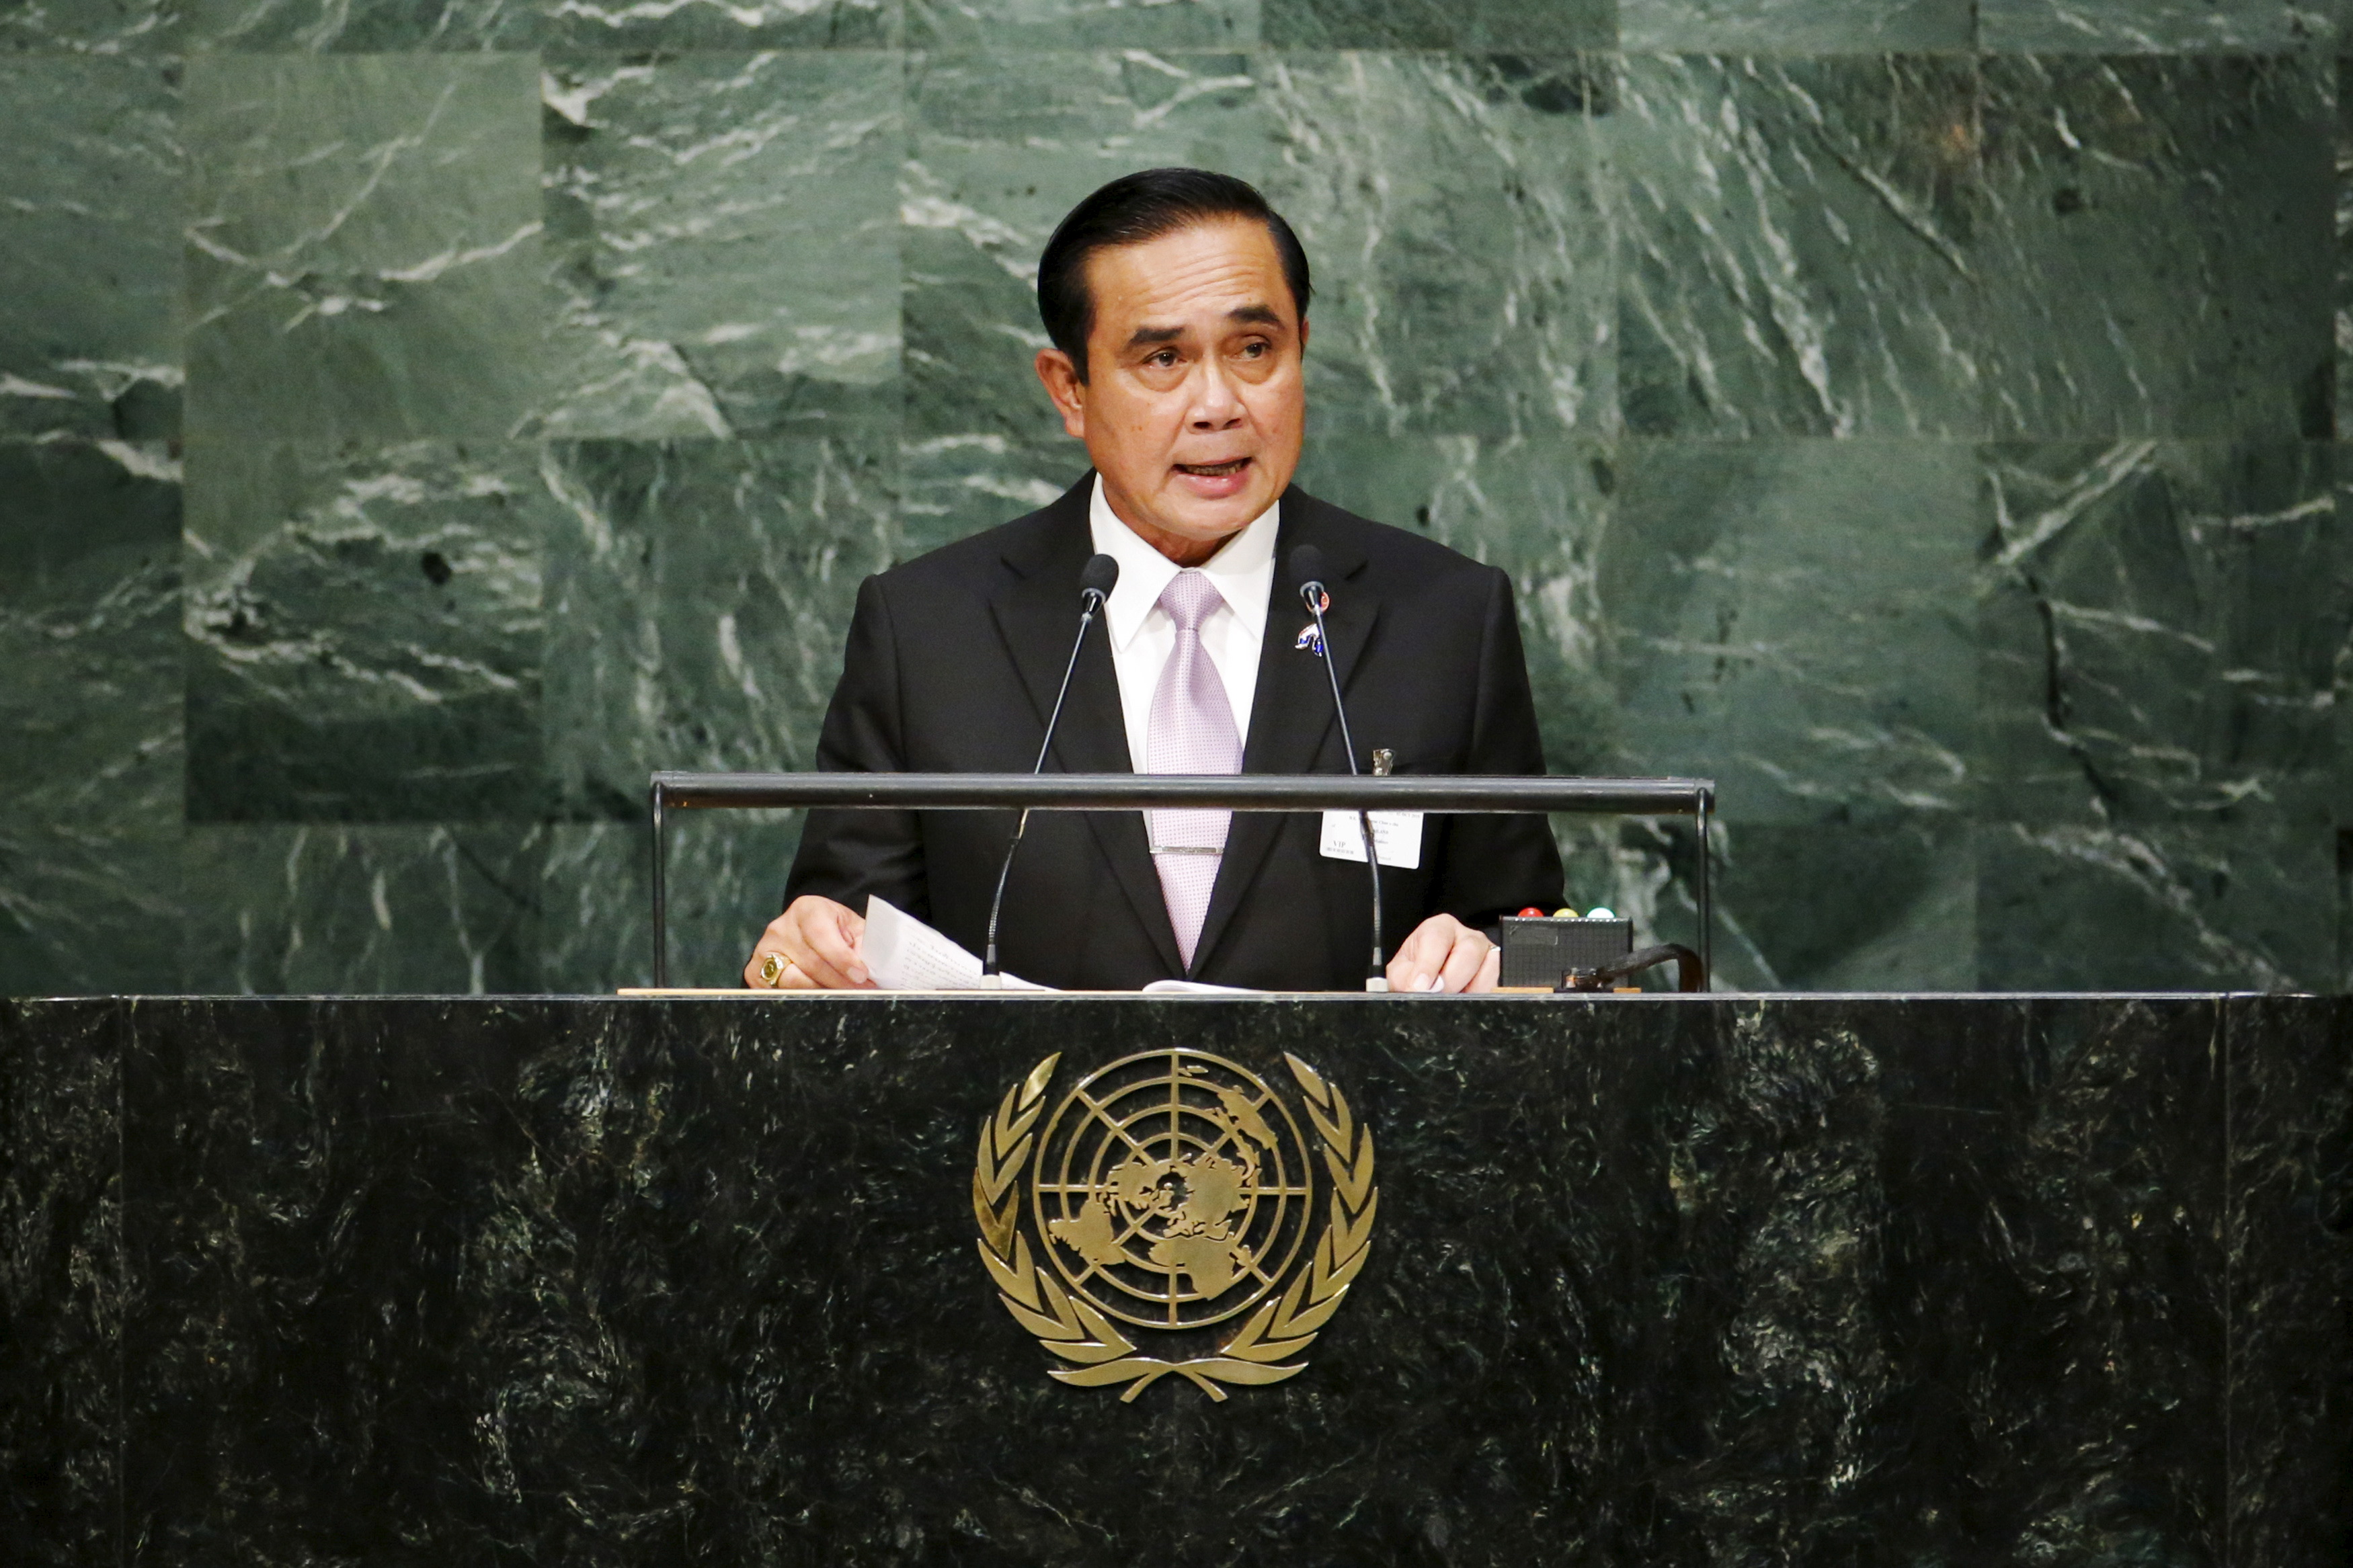 Thailand's PM Prayuth speaks during the 70th session of the United Nations General Assembly at the U.N. Headquarters in New York